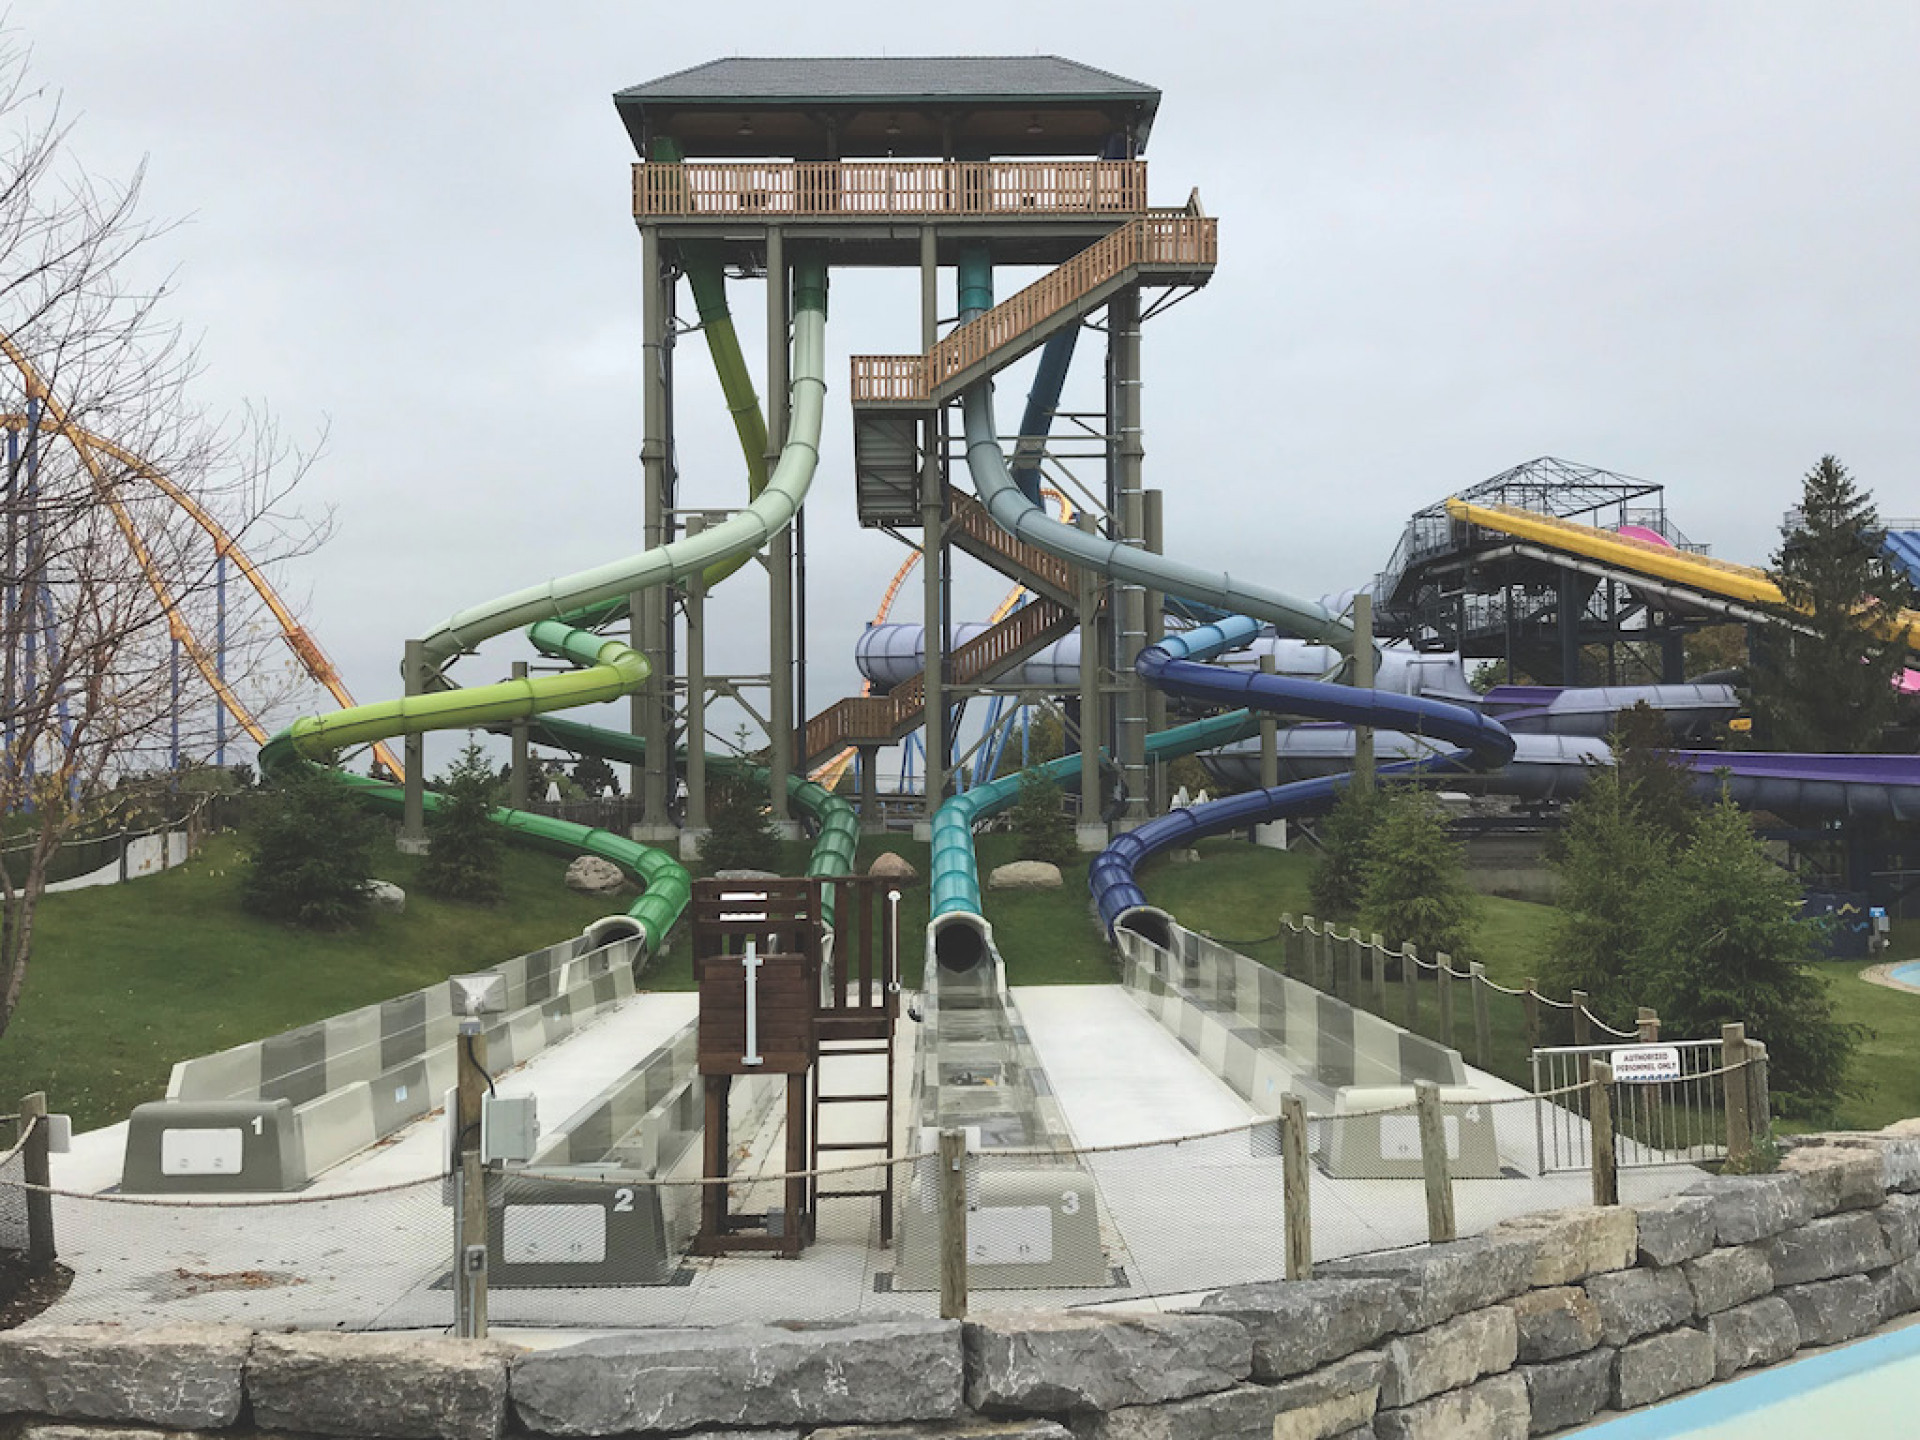 Your End-of-Waterpark-Season Check List